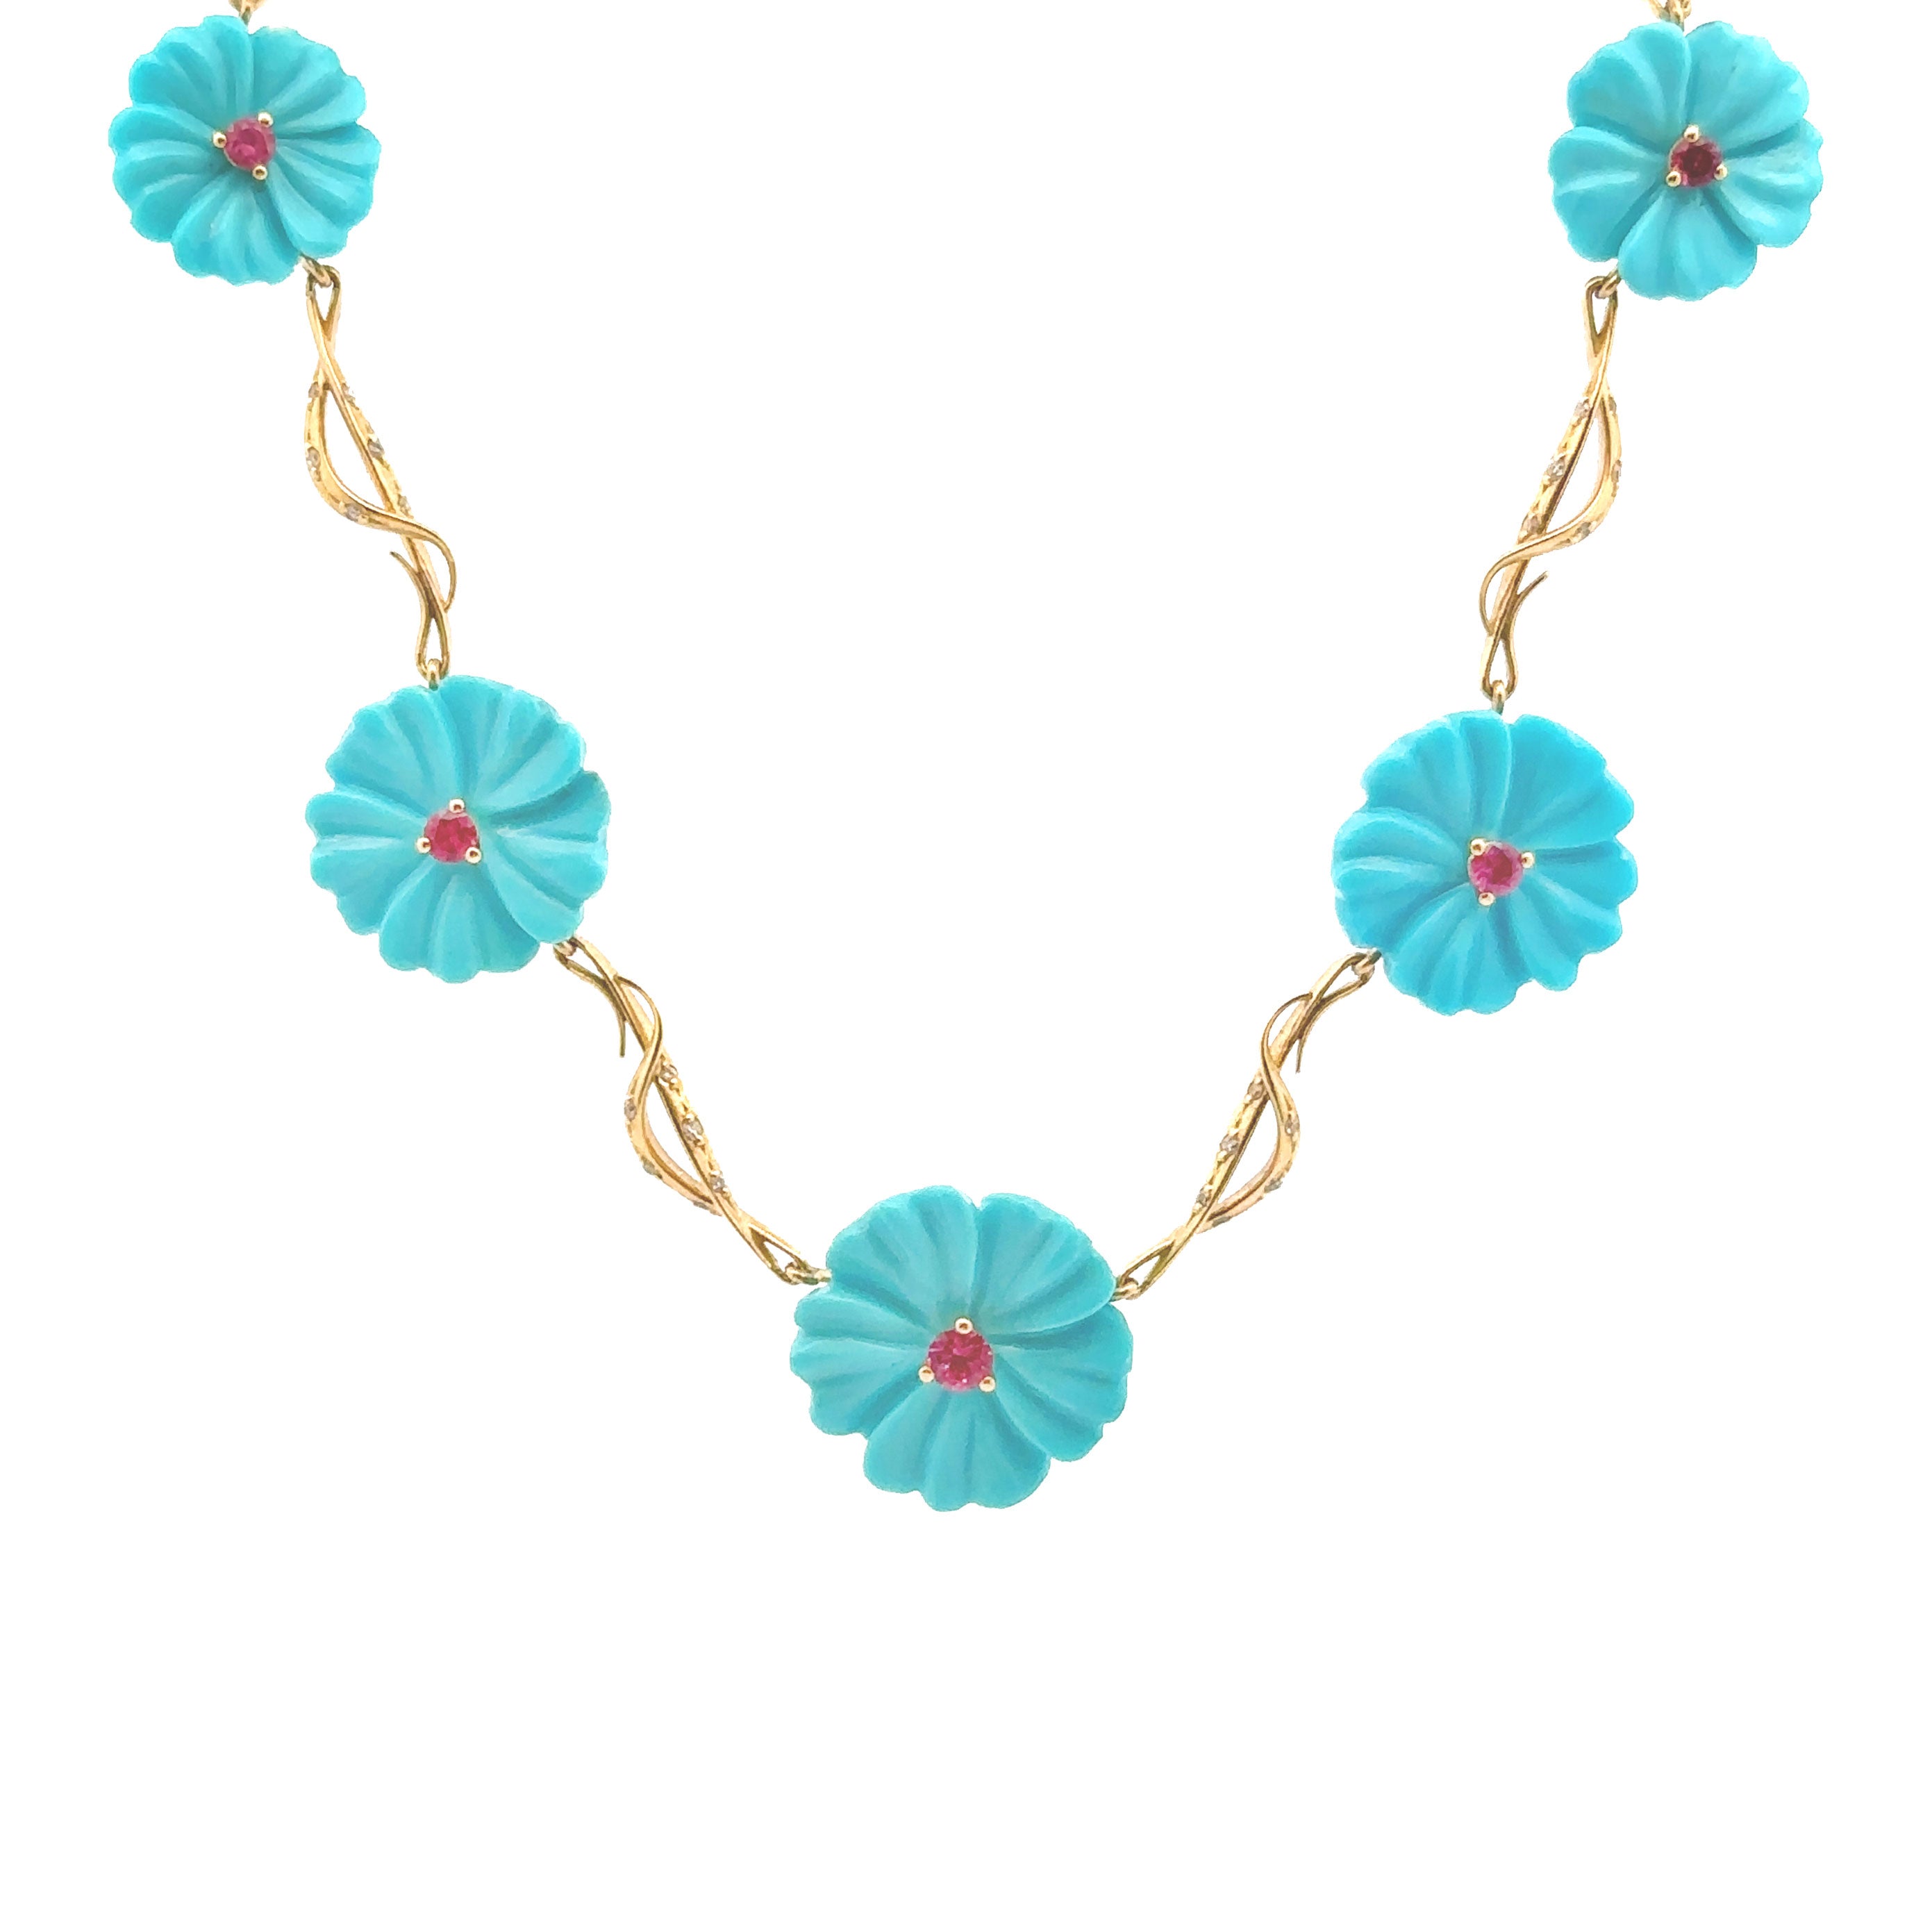 Paul Morelli Carved Turquoise Flower Link Necklace - Be On Park